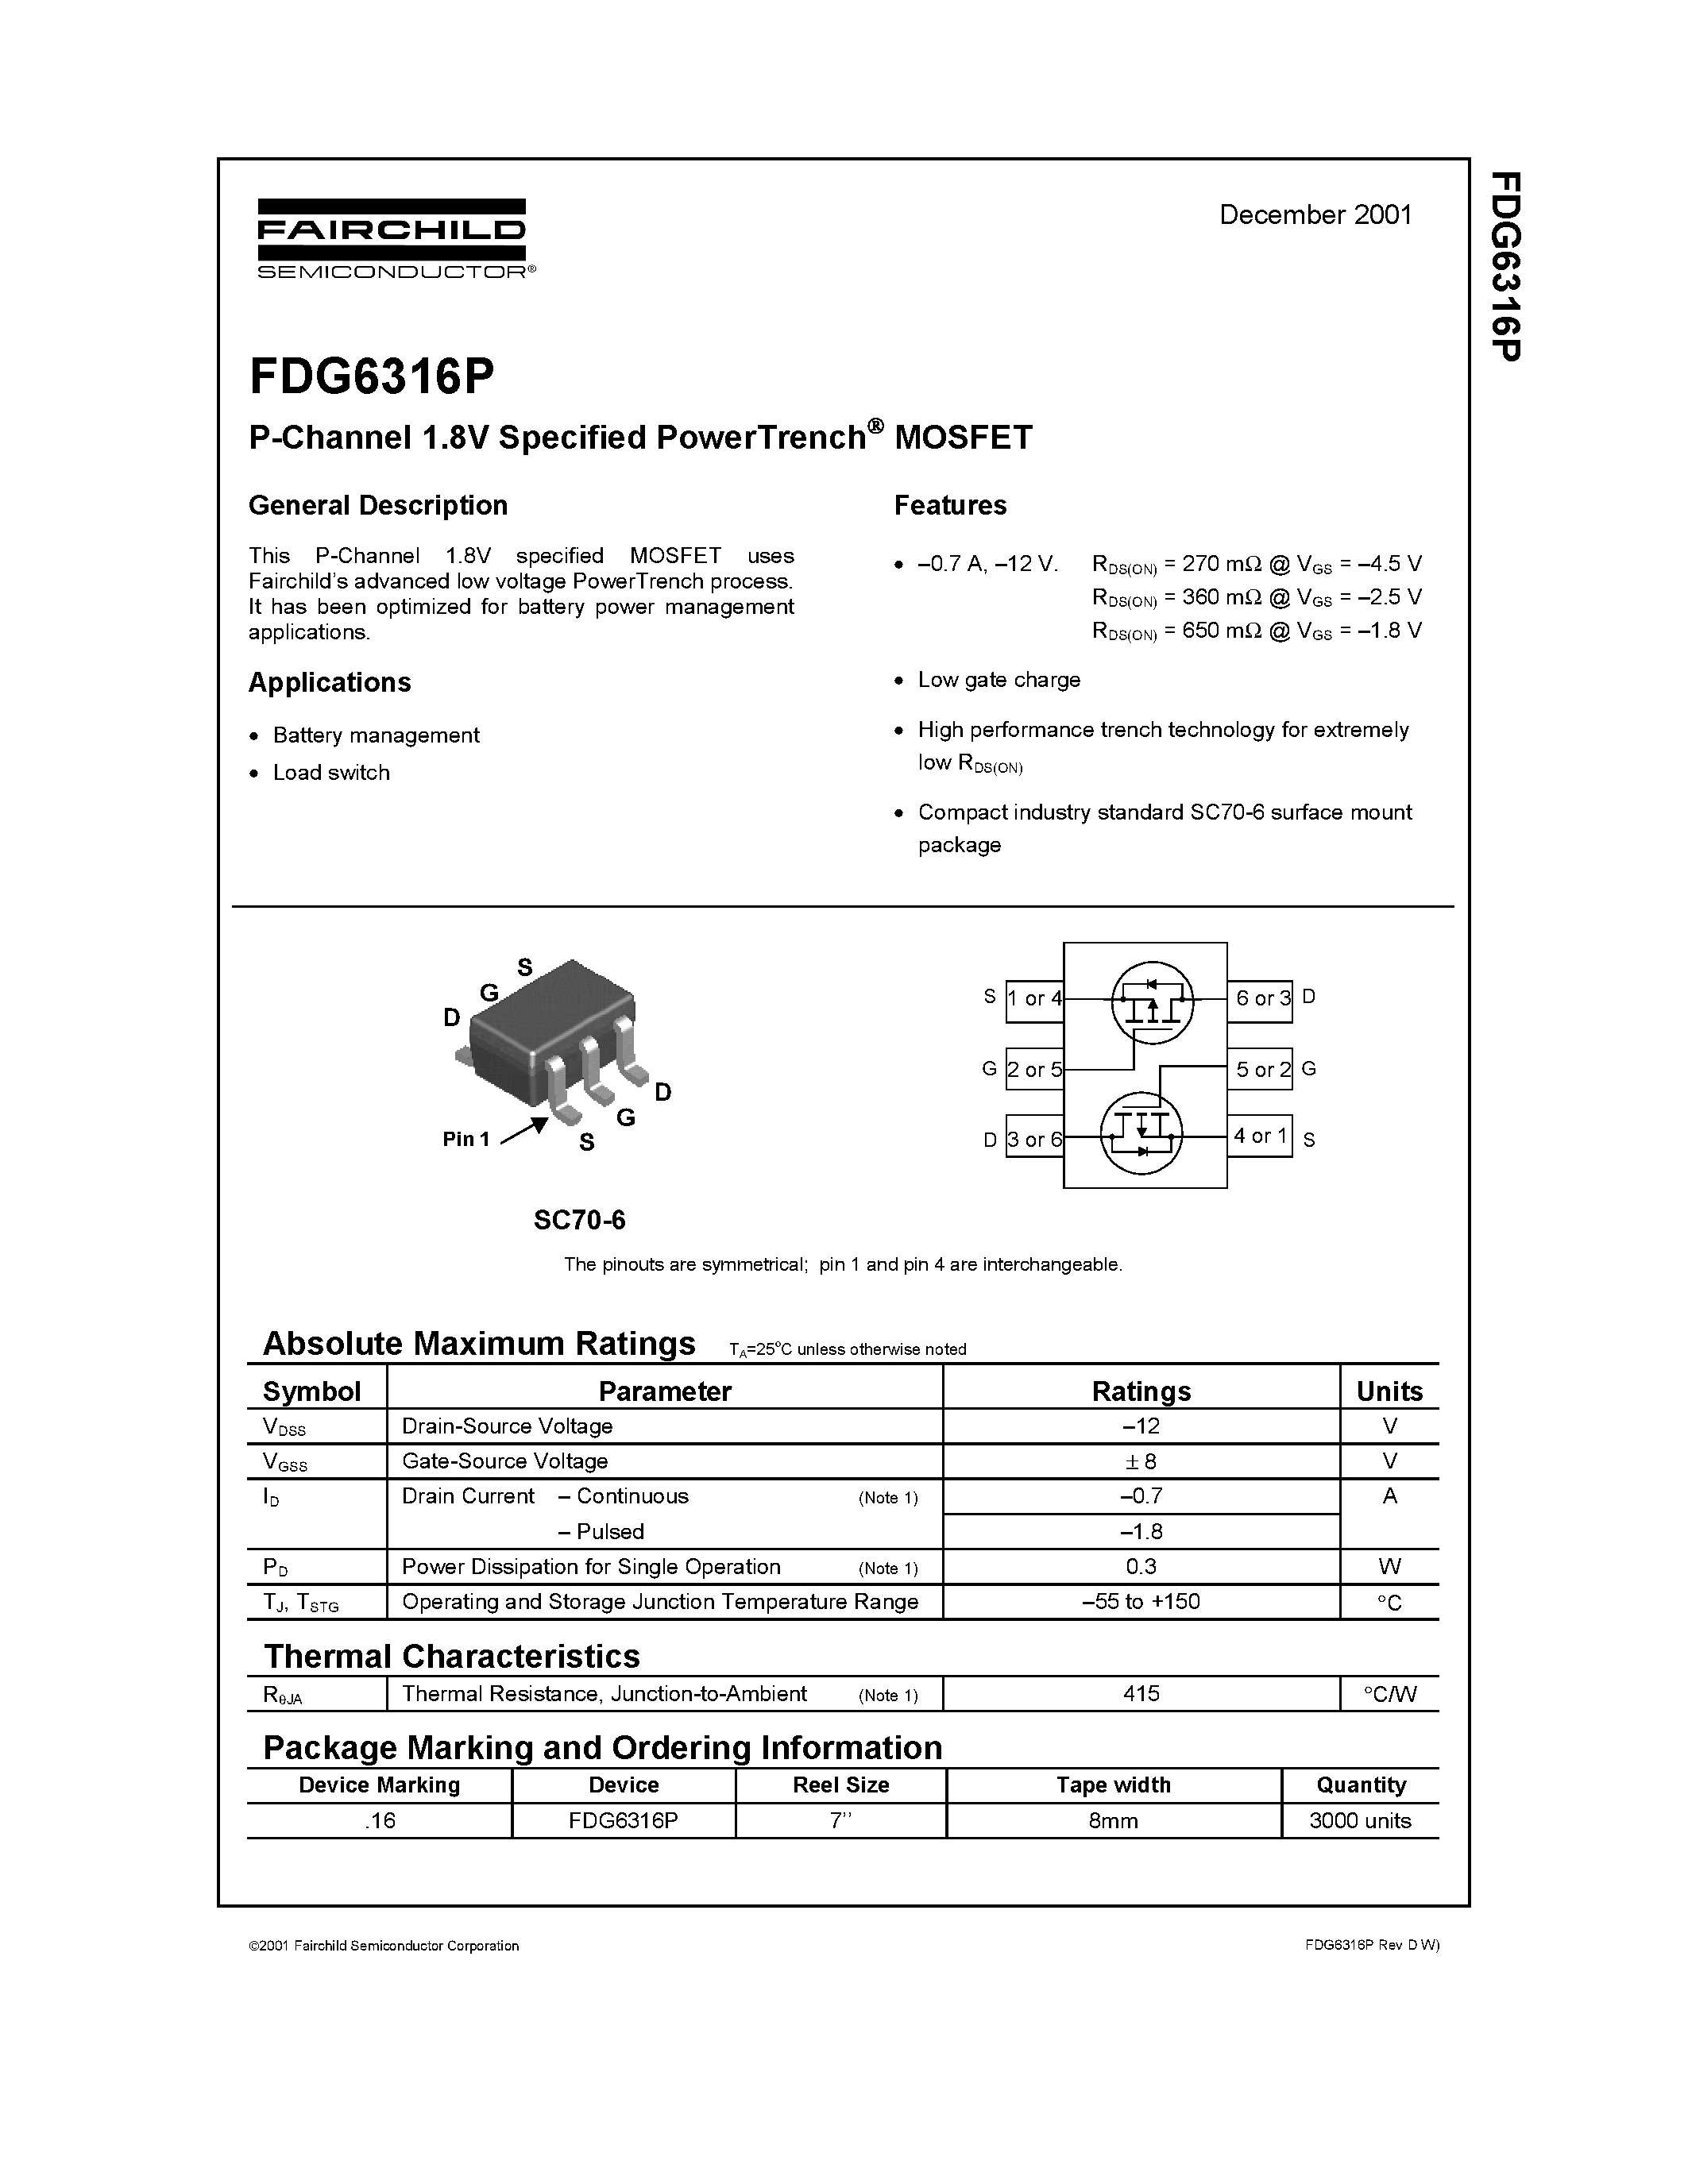 Datasheet FDG6316 - P-Channel 1.8V Specified PowerTrench MOSFET page 1